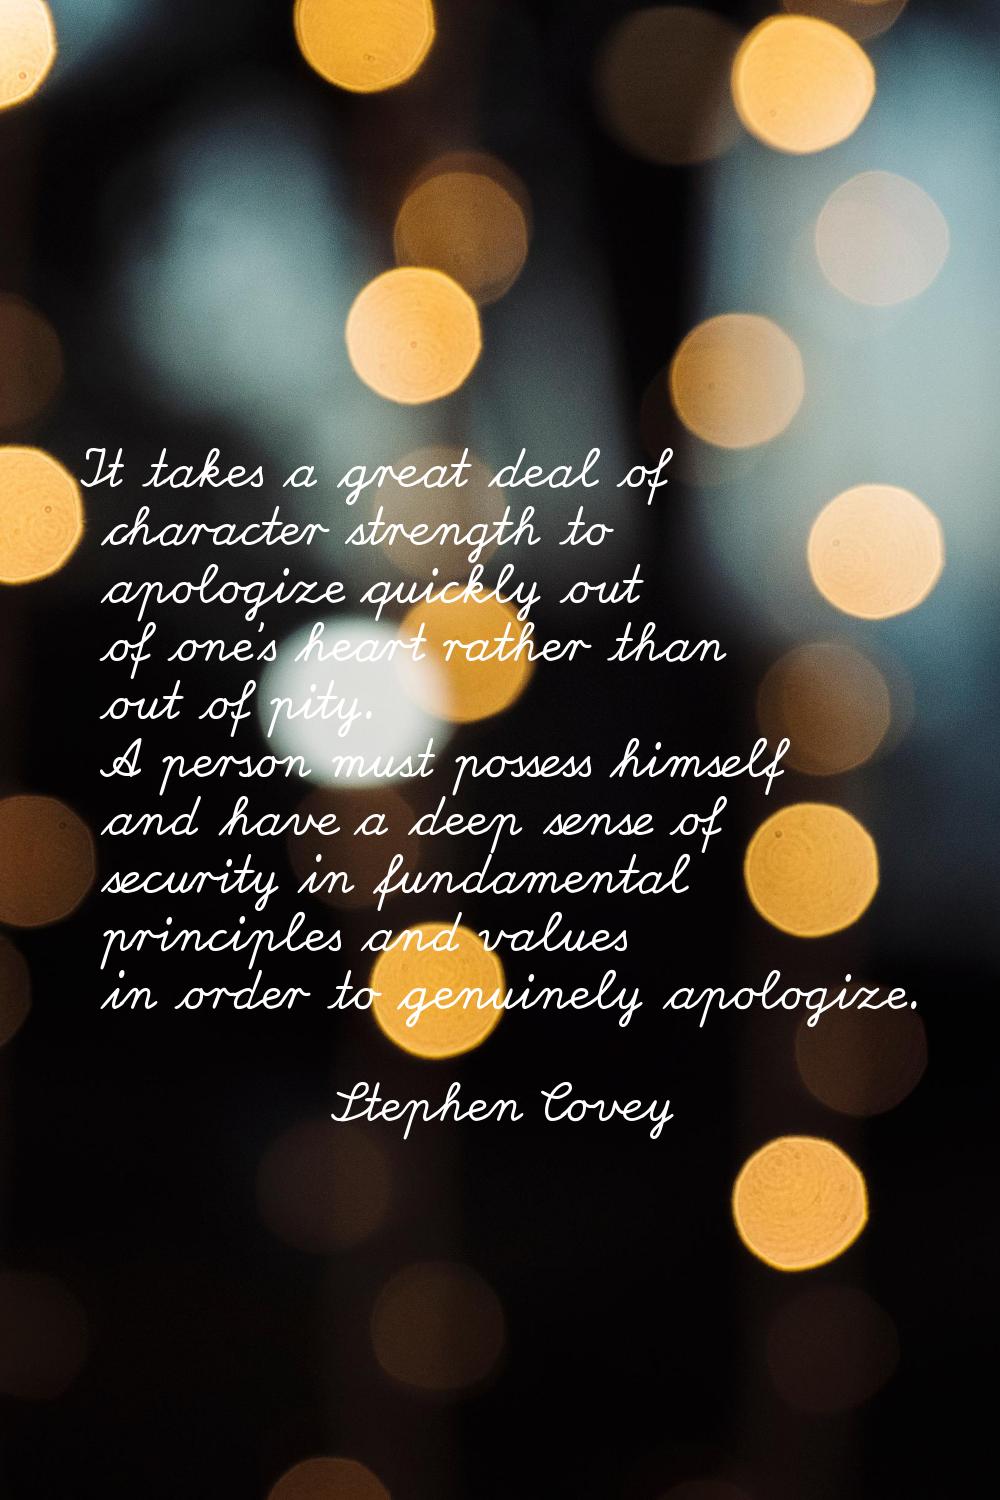 It takes a great deal of character strength to apologize quickly out of one's heart rather than out